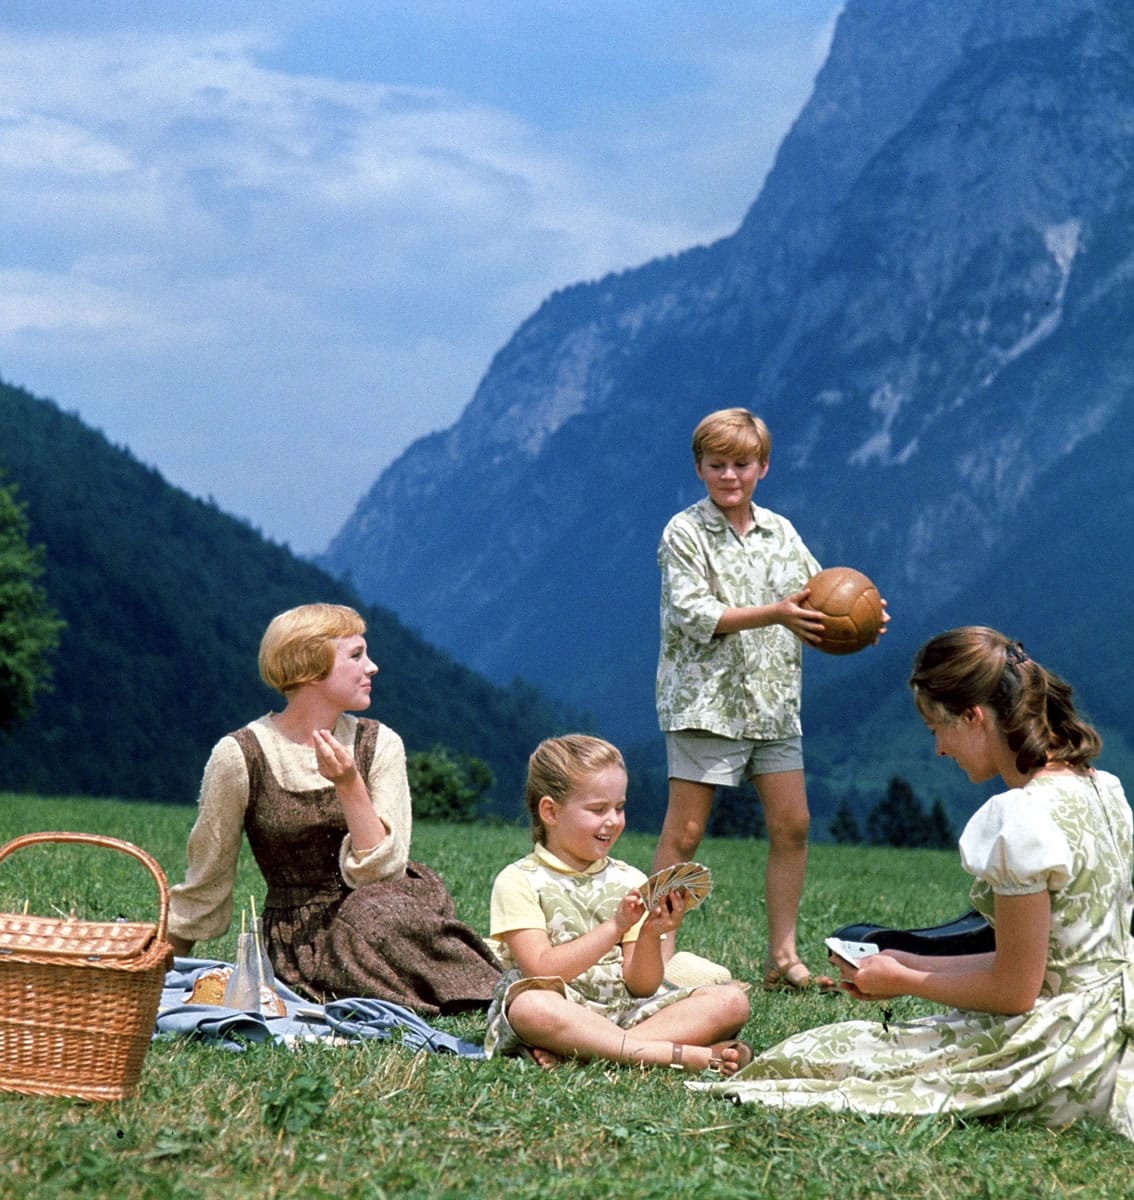 Twentieth Century Fox Home Entertainment
Julie Andrews, as Maria, from left, Kym Karath, as Gretl, Duane Chase, as Kurt, and Chairmian Carr, as Liesl, in a scene during the song &quot;Do-Re-Mi&quot; from the film &quot;The Sound of Music.&quot; The 1965 Oscar-winning film adaptation of the Rodgers